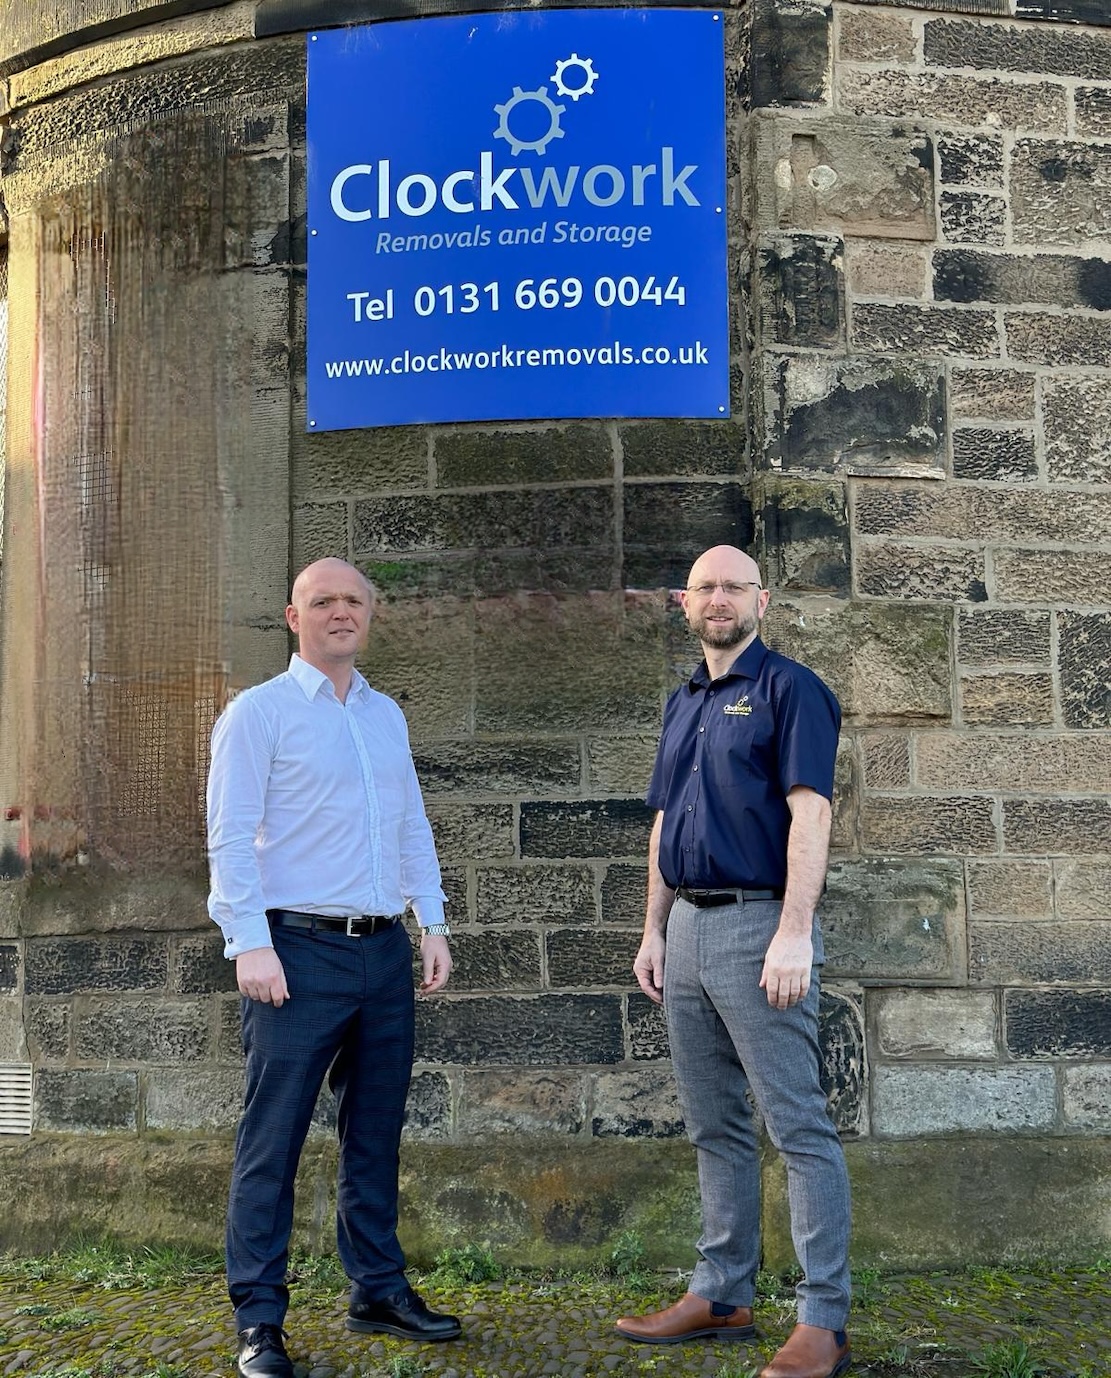 Clockwork appoints Andy Blyth as group finance director